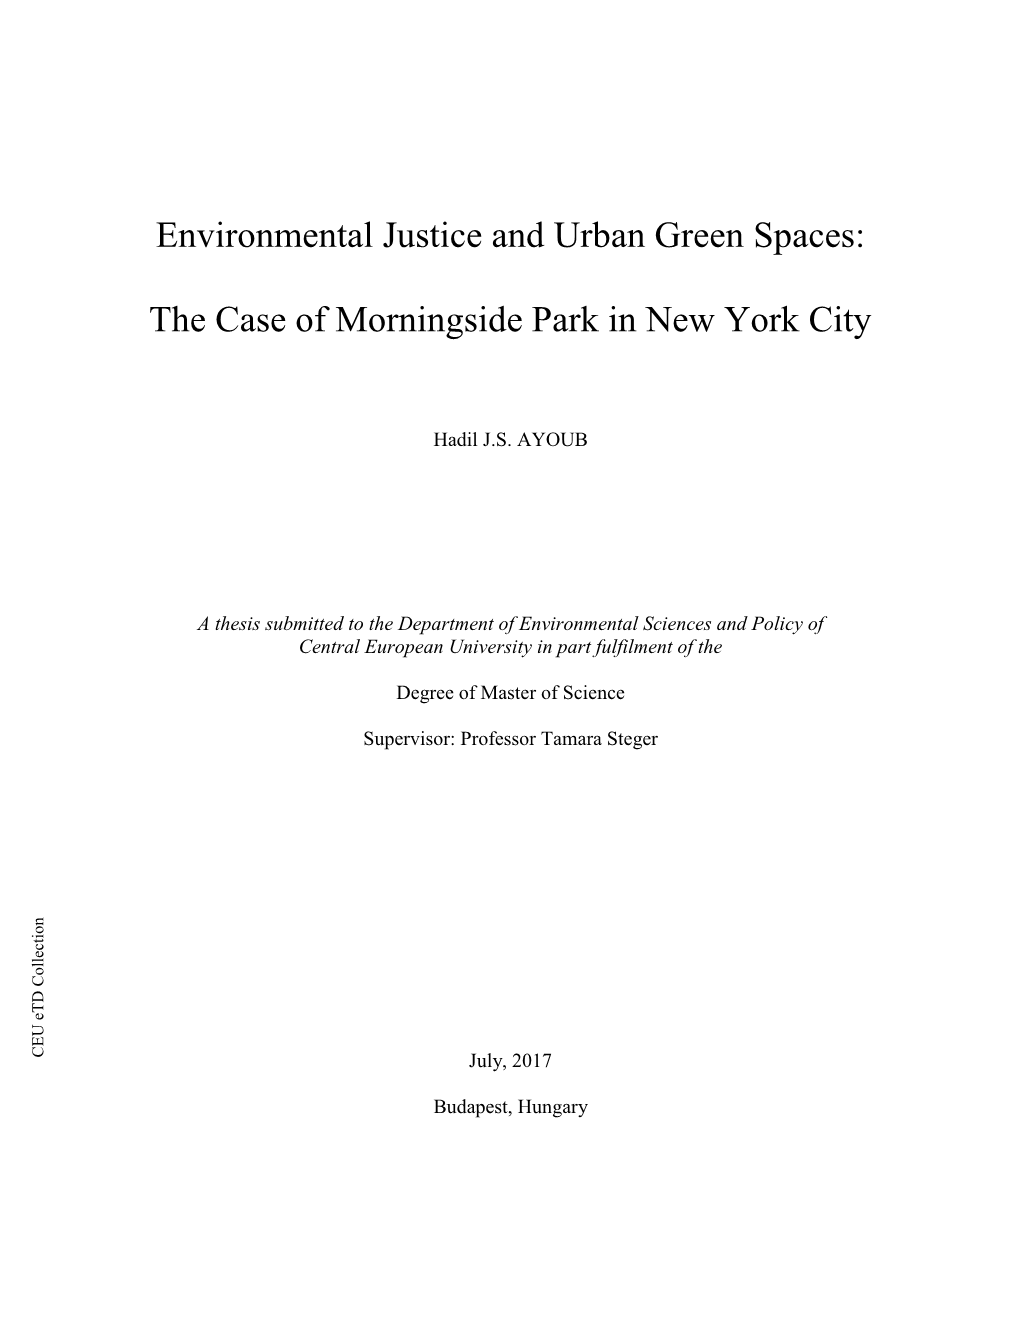 Environmental Justice and Urban Green Spaces: the Case of Morningside Park in New York City